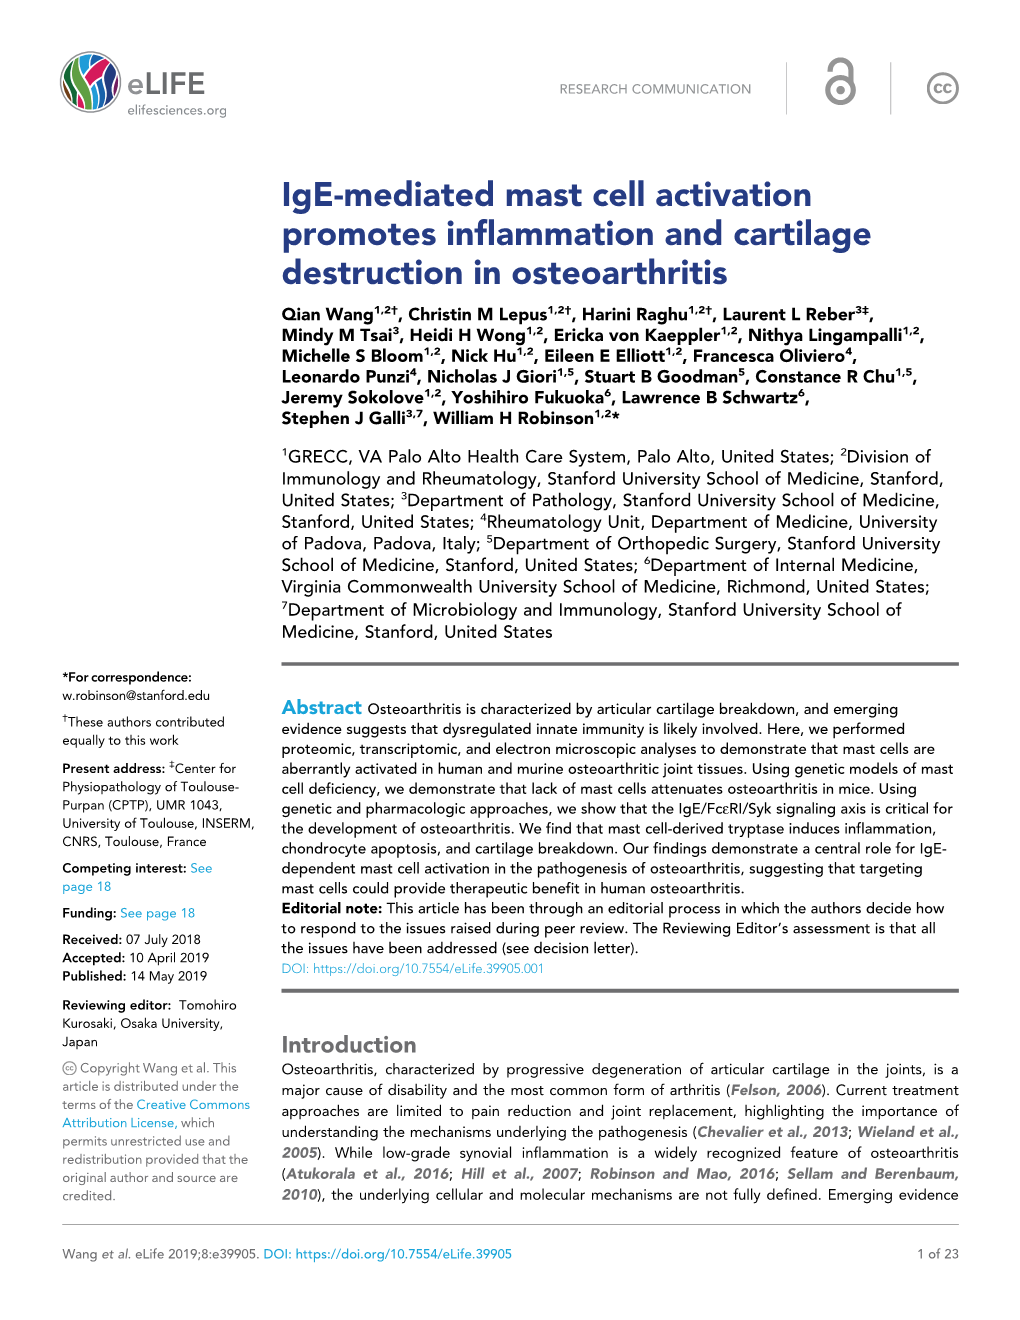 Ige-Mediated Mast Cell Activation Promotes Inflammation And